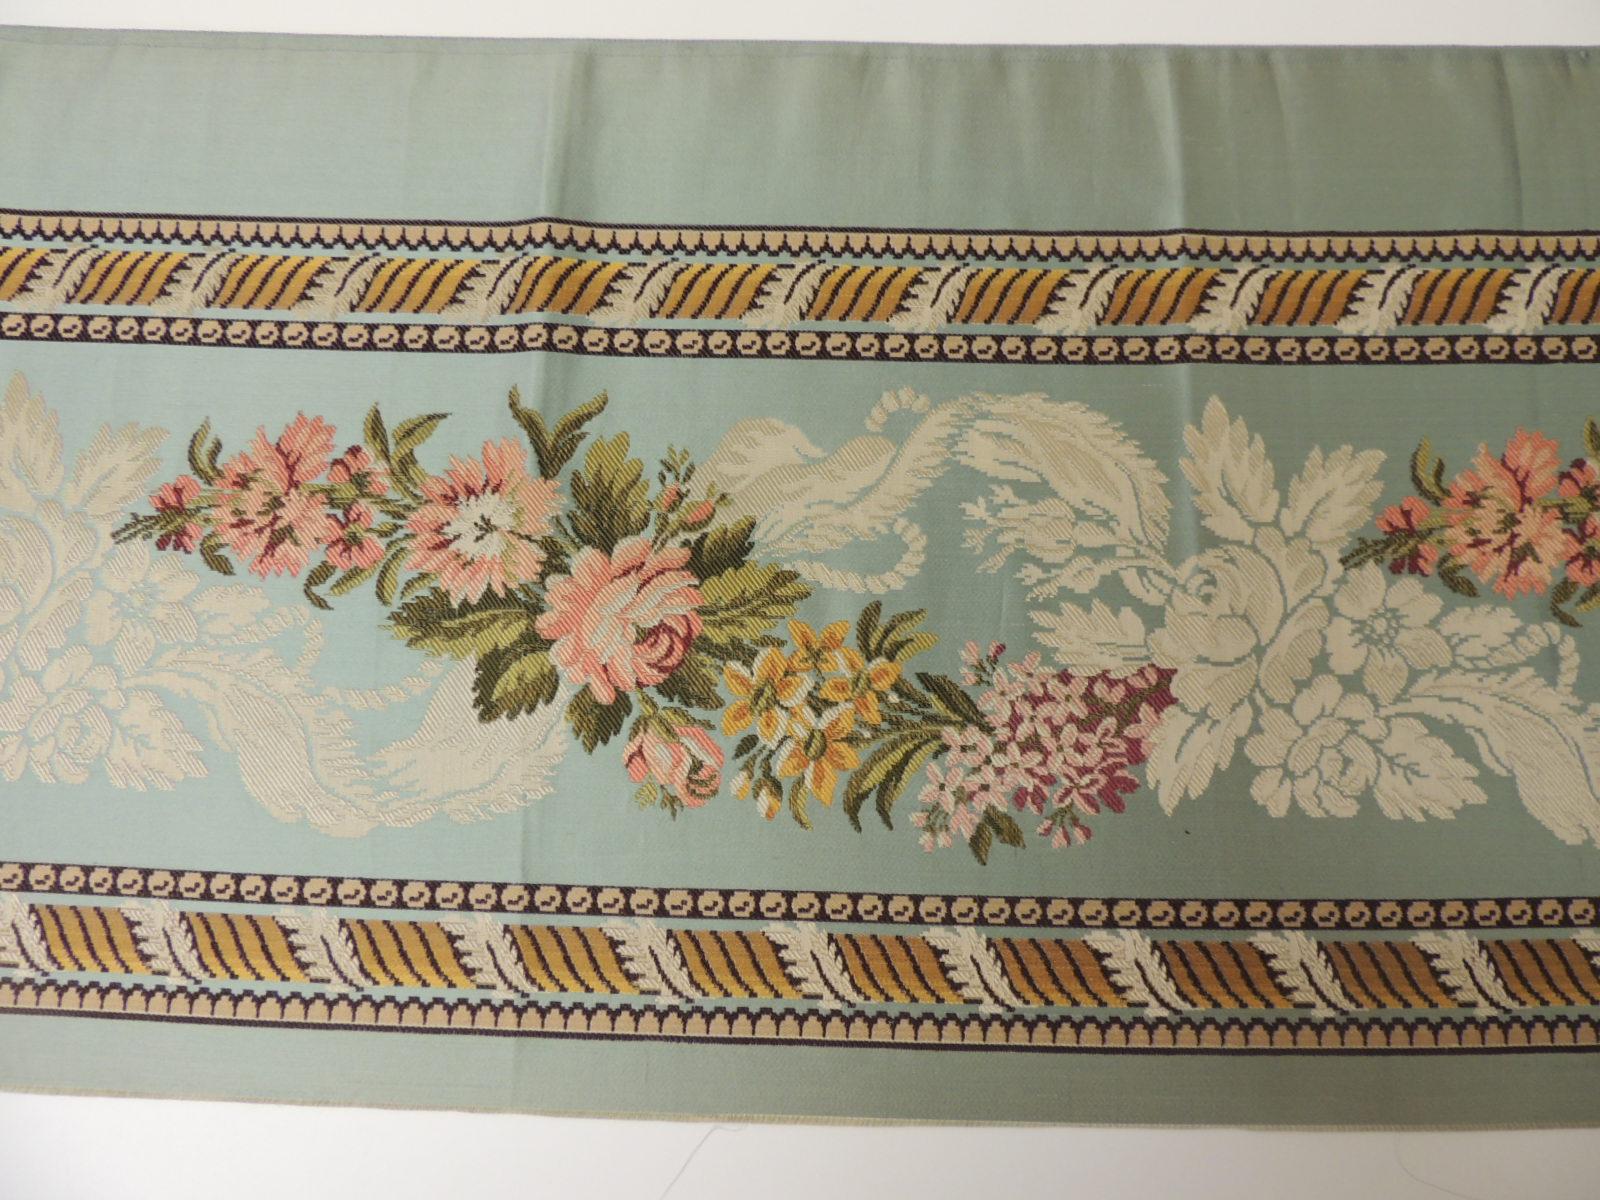 18th century French floral green and pink satin silk brocade textile.
Unique woven silk textile depicting flowers and a twisted design border. Narrow woven textile.
Depicts flowers in bloom with bows, ribbons and acanthus leaves borders.
In